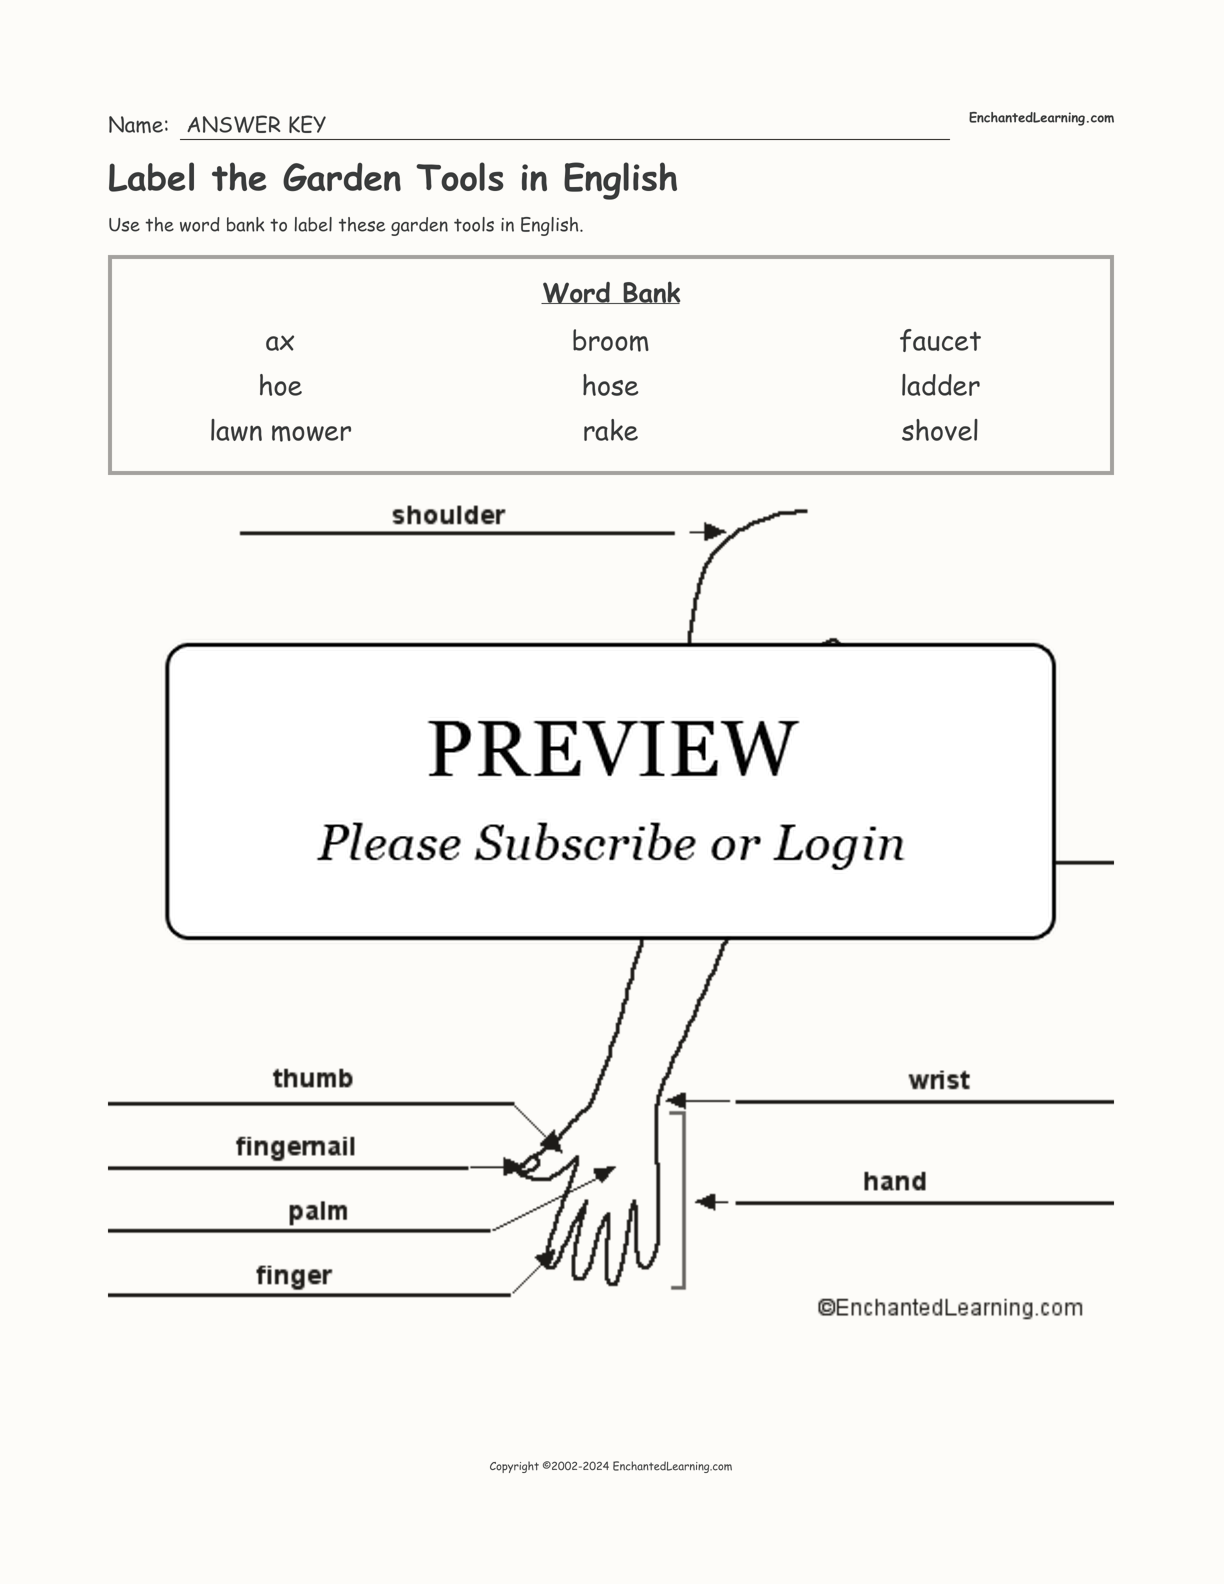 Label the Garden Tools in English interactive worksheet page 2